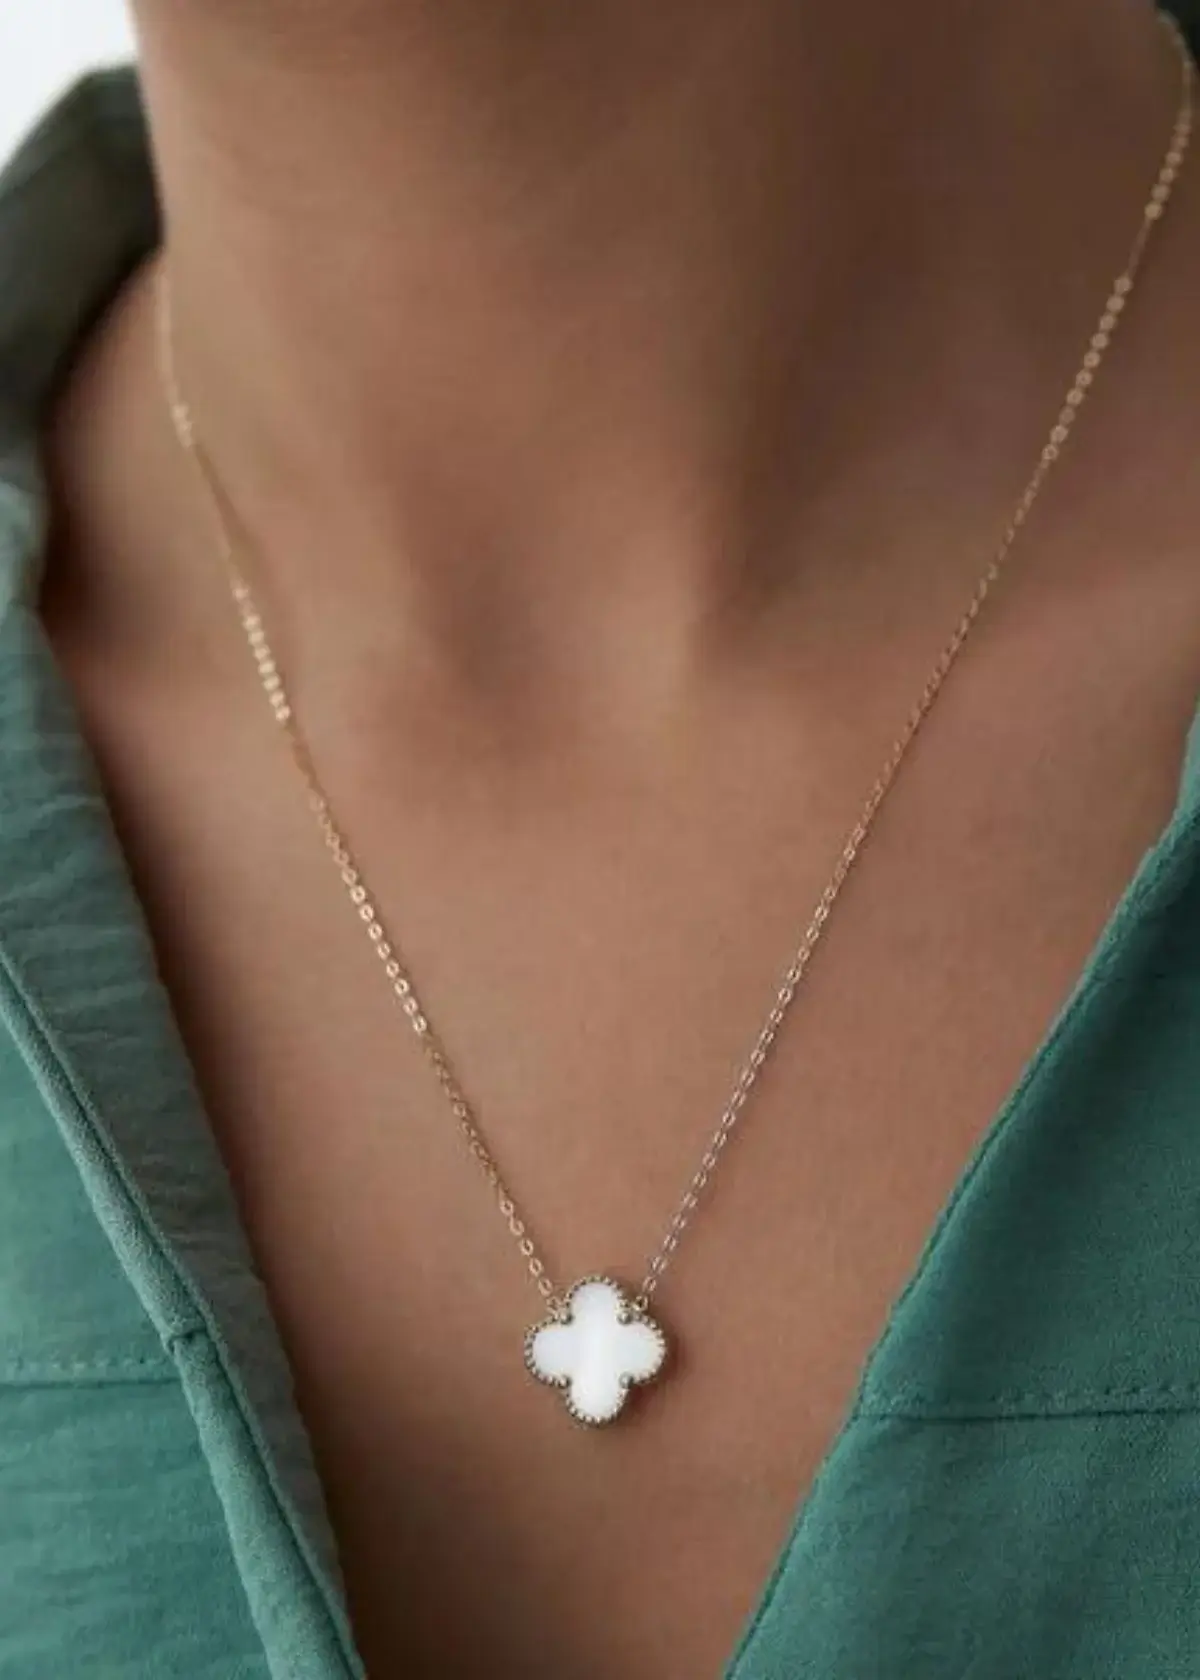 What is a clover necklace?